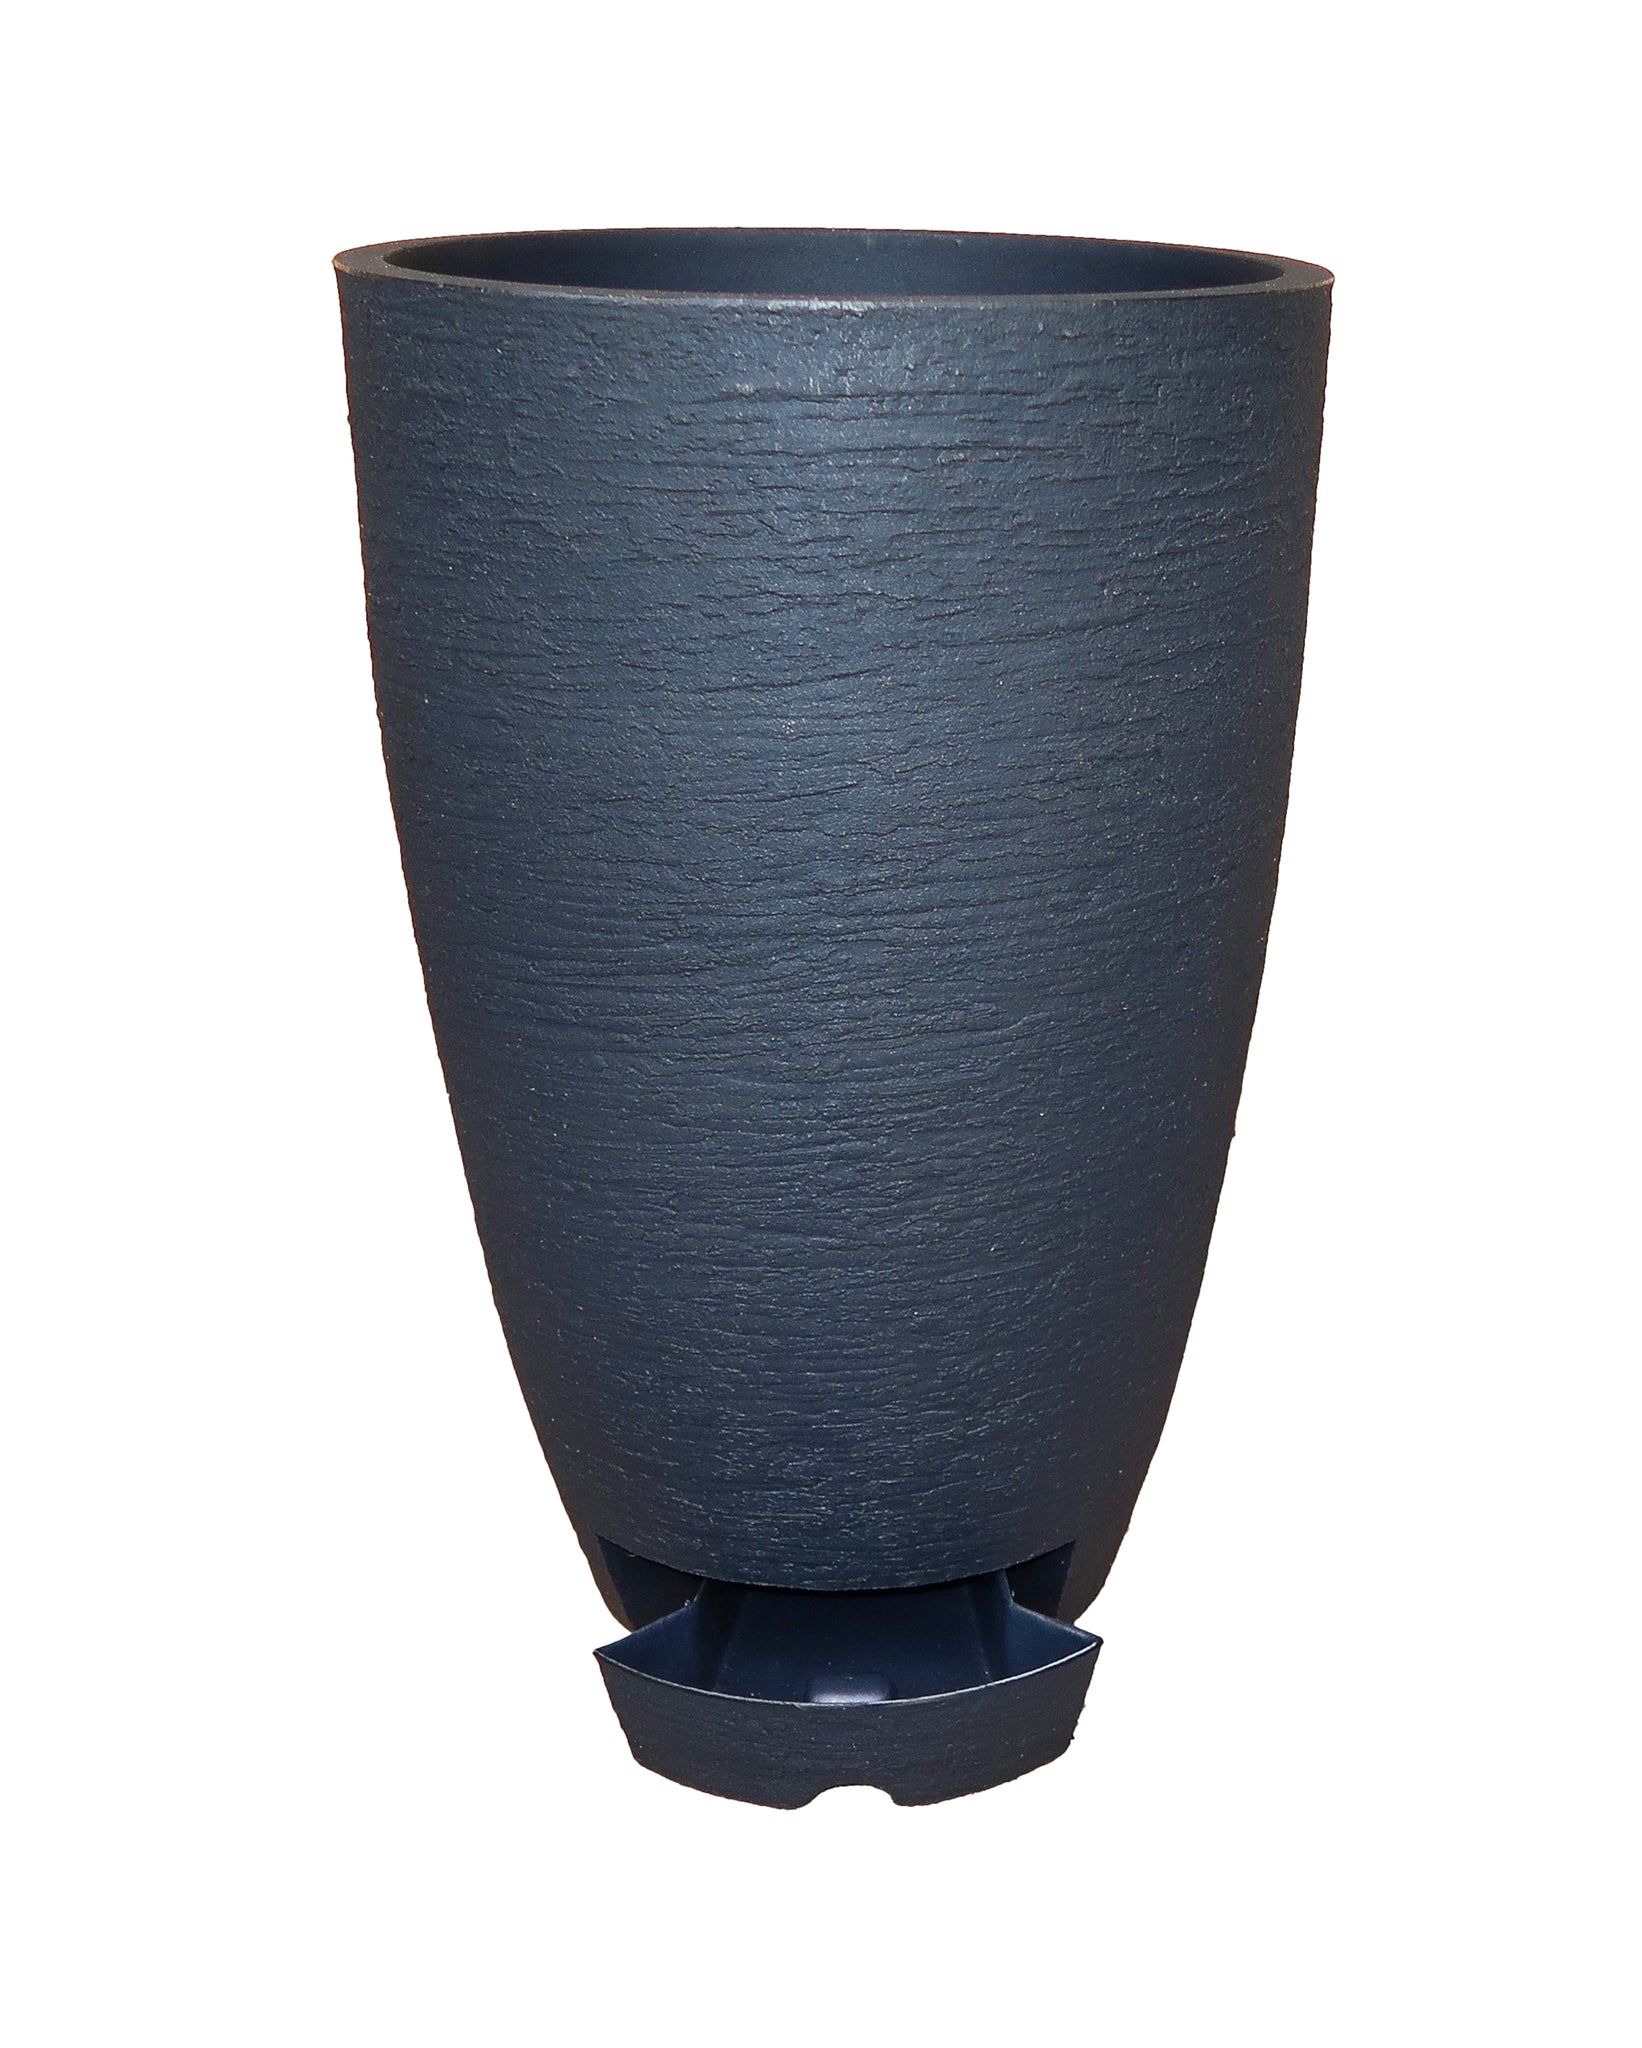 Modern upright plant pot. Ideal for use indoors. Built in removable drip tray. Ideal for the modern apartment. Suitable for indoors and outdoors. Lightweight Polycarbon construction.